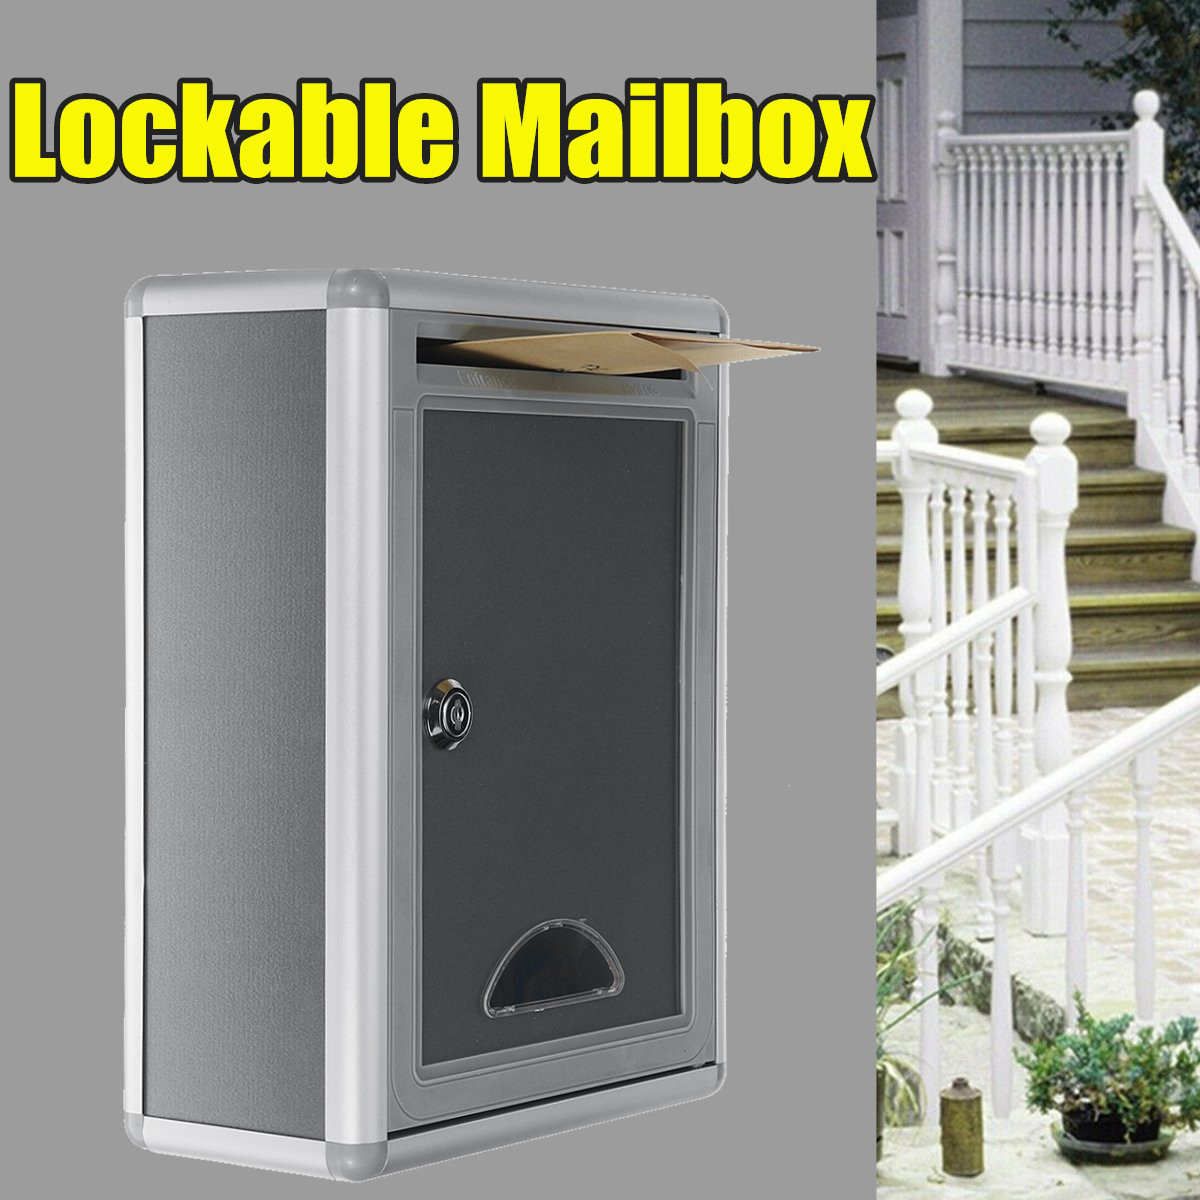 Retro-Aluminum-Mail-Letter-Post-Storage-Box-Outdoor-Lockable-Mailbox-Wall-Mount-Boxes-1798029-1